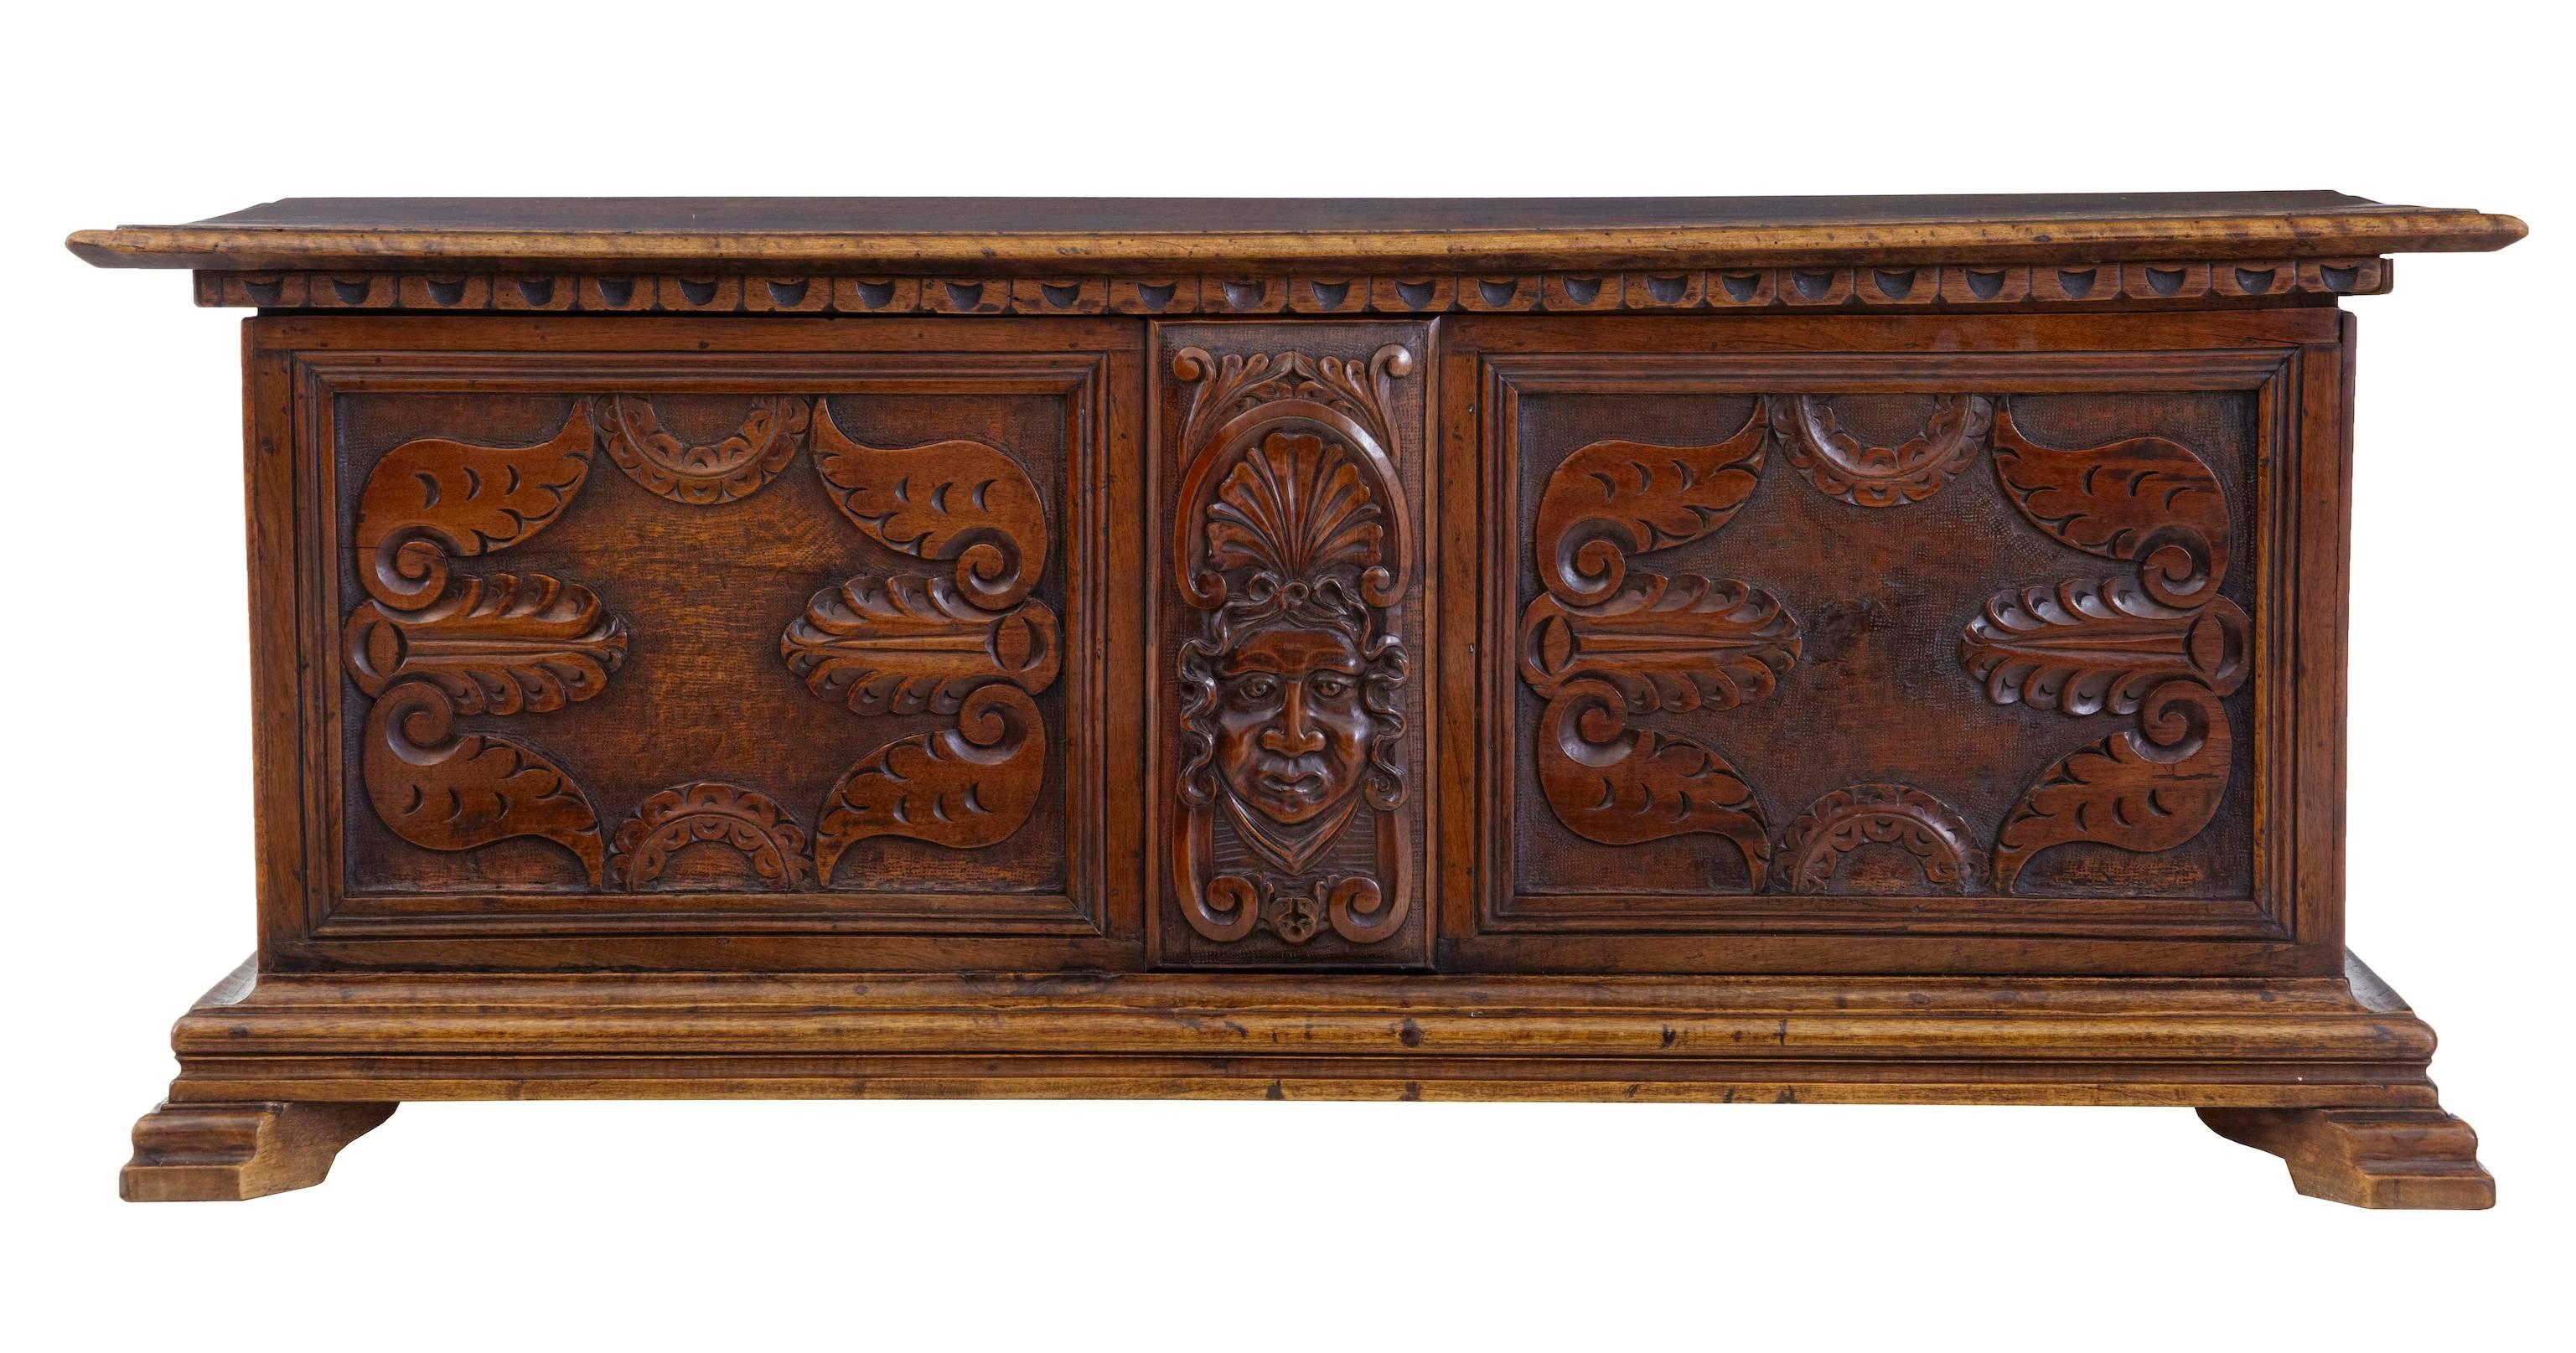 19th century Flemish walnut coffer, circa 1870.
Baroque influenced carving featuring a tribal face to the front.
Lid opens to plain interior.

Measures: Height 20 1/2".
Width 51".
Depth 20".